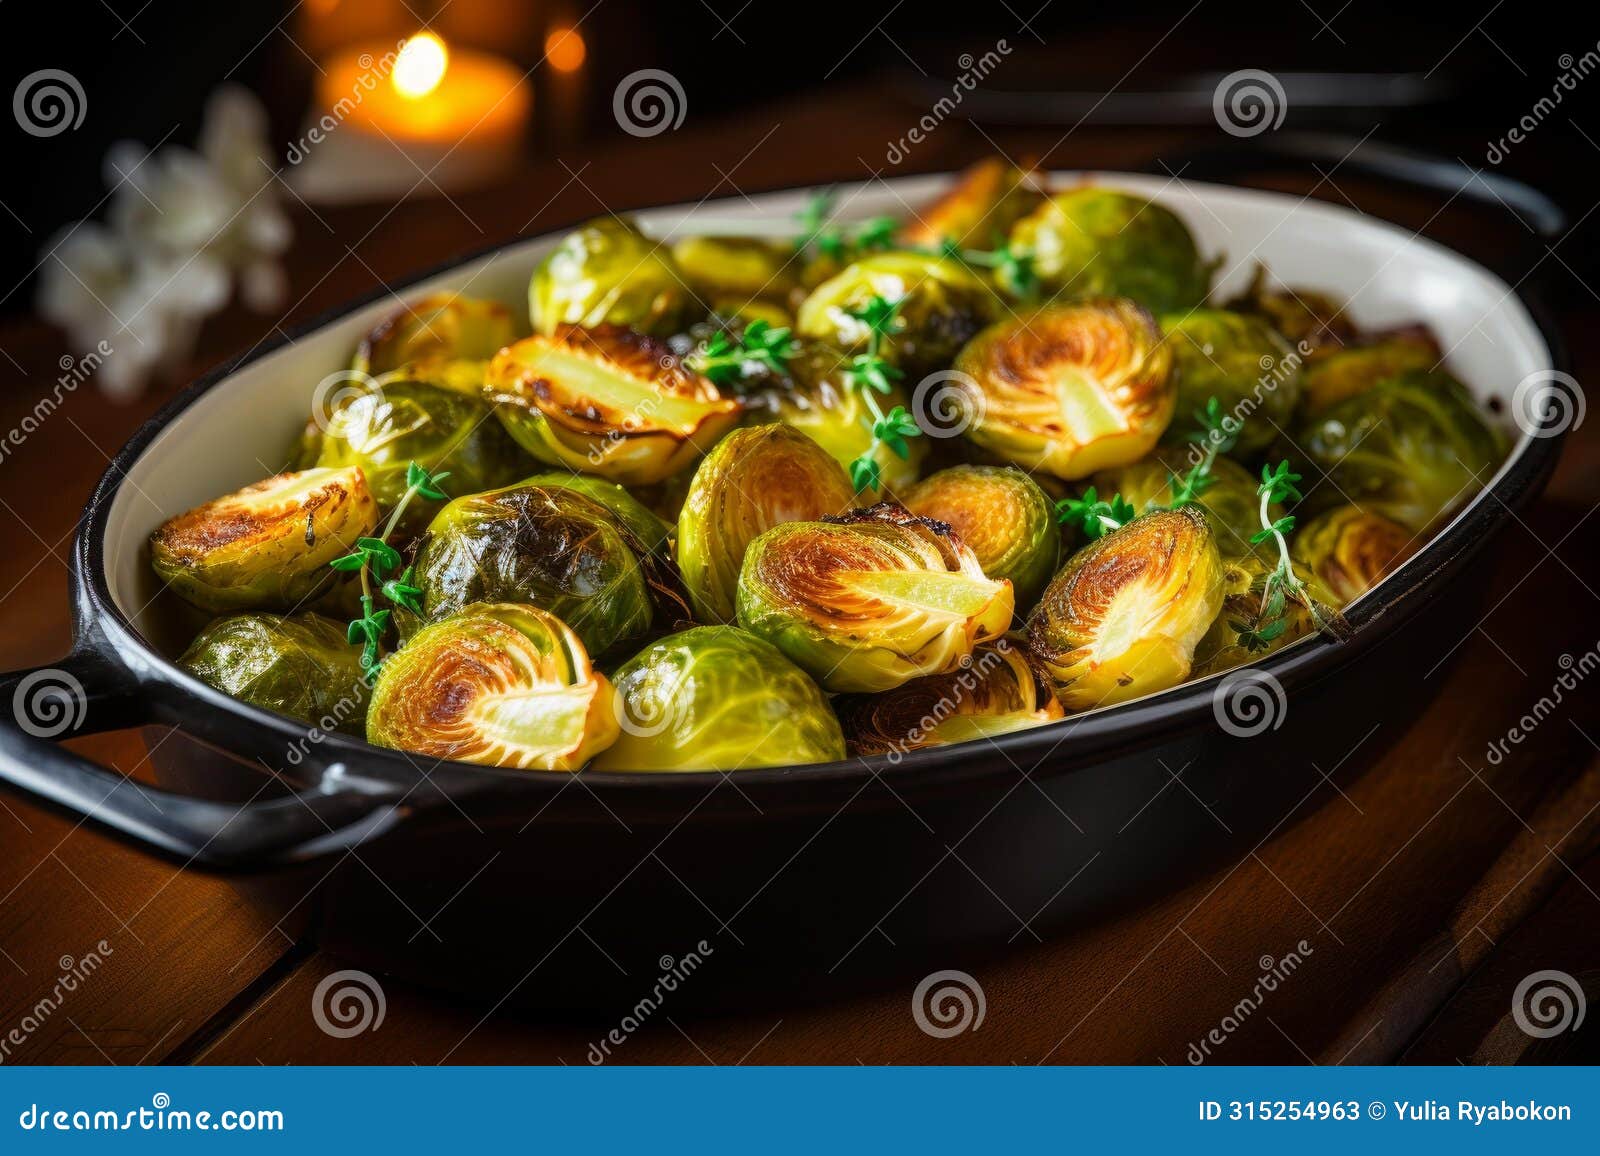 flavorful roasted brussel sprouts. generate ai